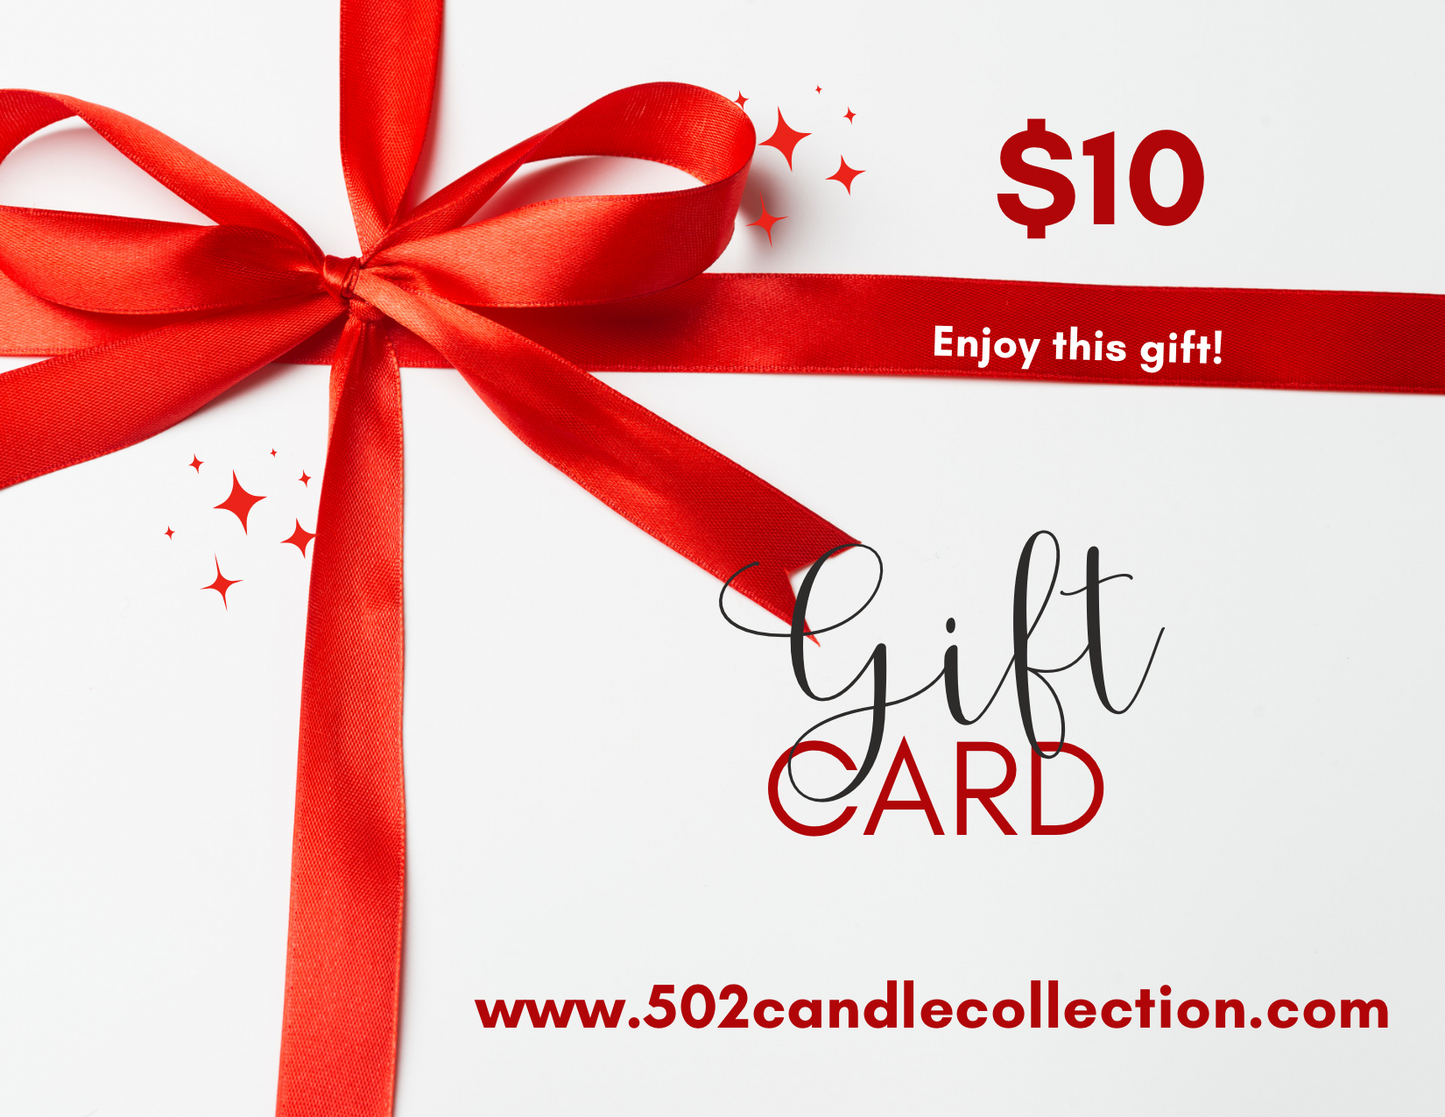 The 502 Candle Collection Gift Card